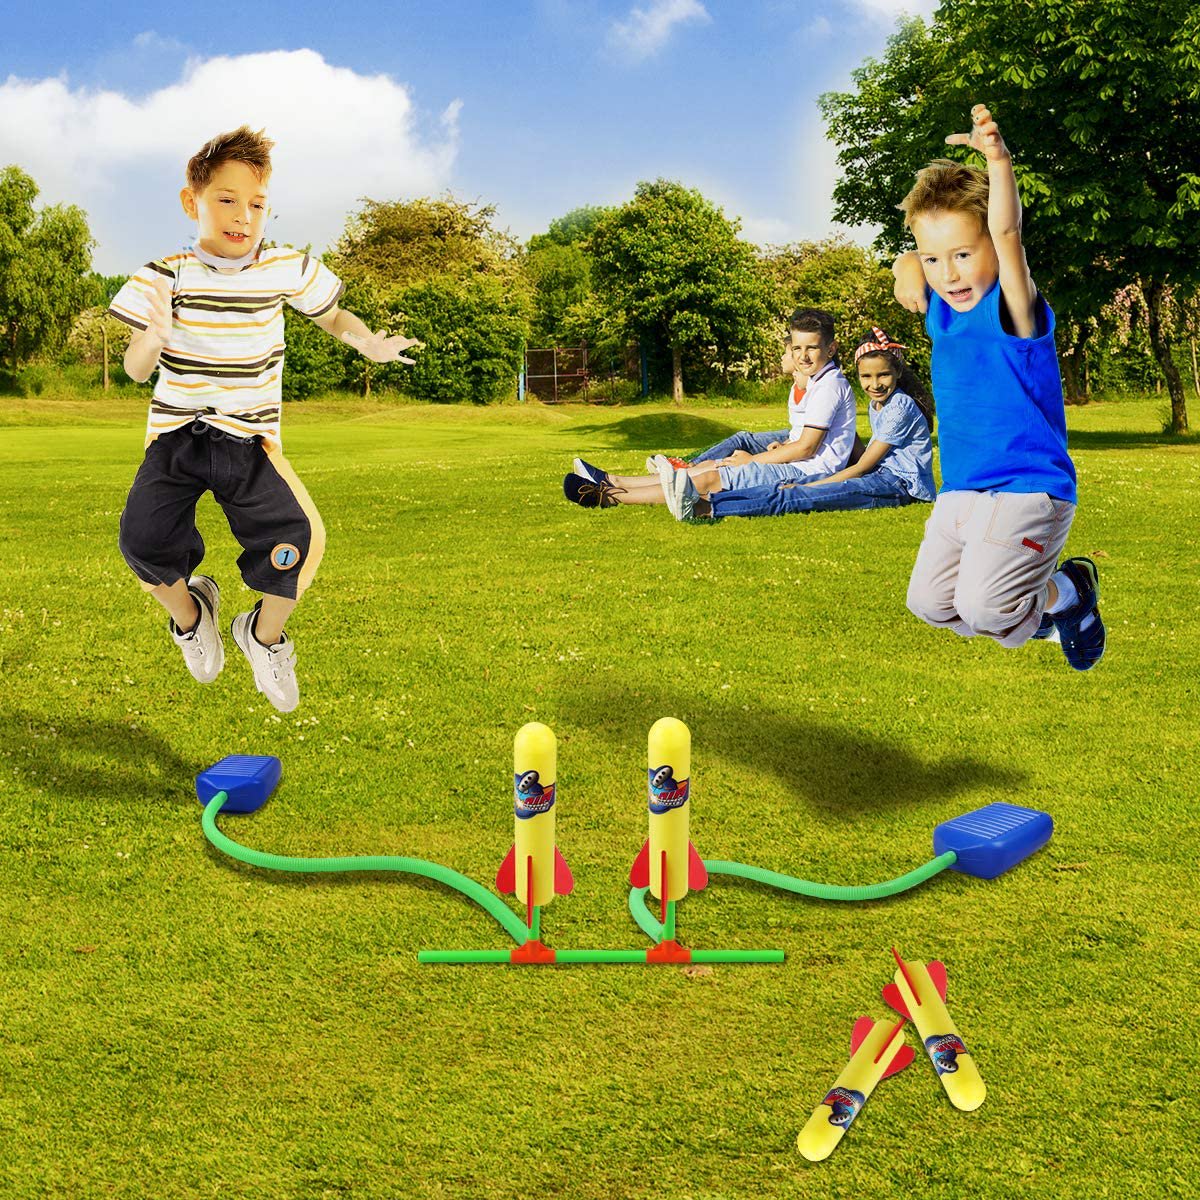 Terra Dueling Rockets Launcher Toys for Kids, 4 Foam and 2 LED Rockets, Summer Outdoor Games Toys, Easter Basket Stuffers Birthday Gifts for Toddlers Boys Girls Age 3 4 5+ (Soars Up to 100 Ft)